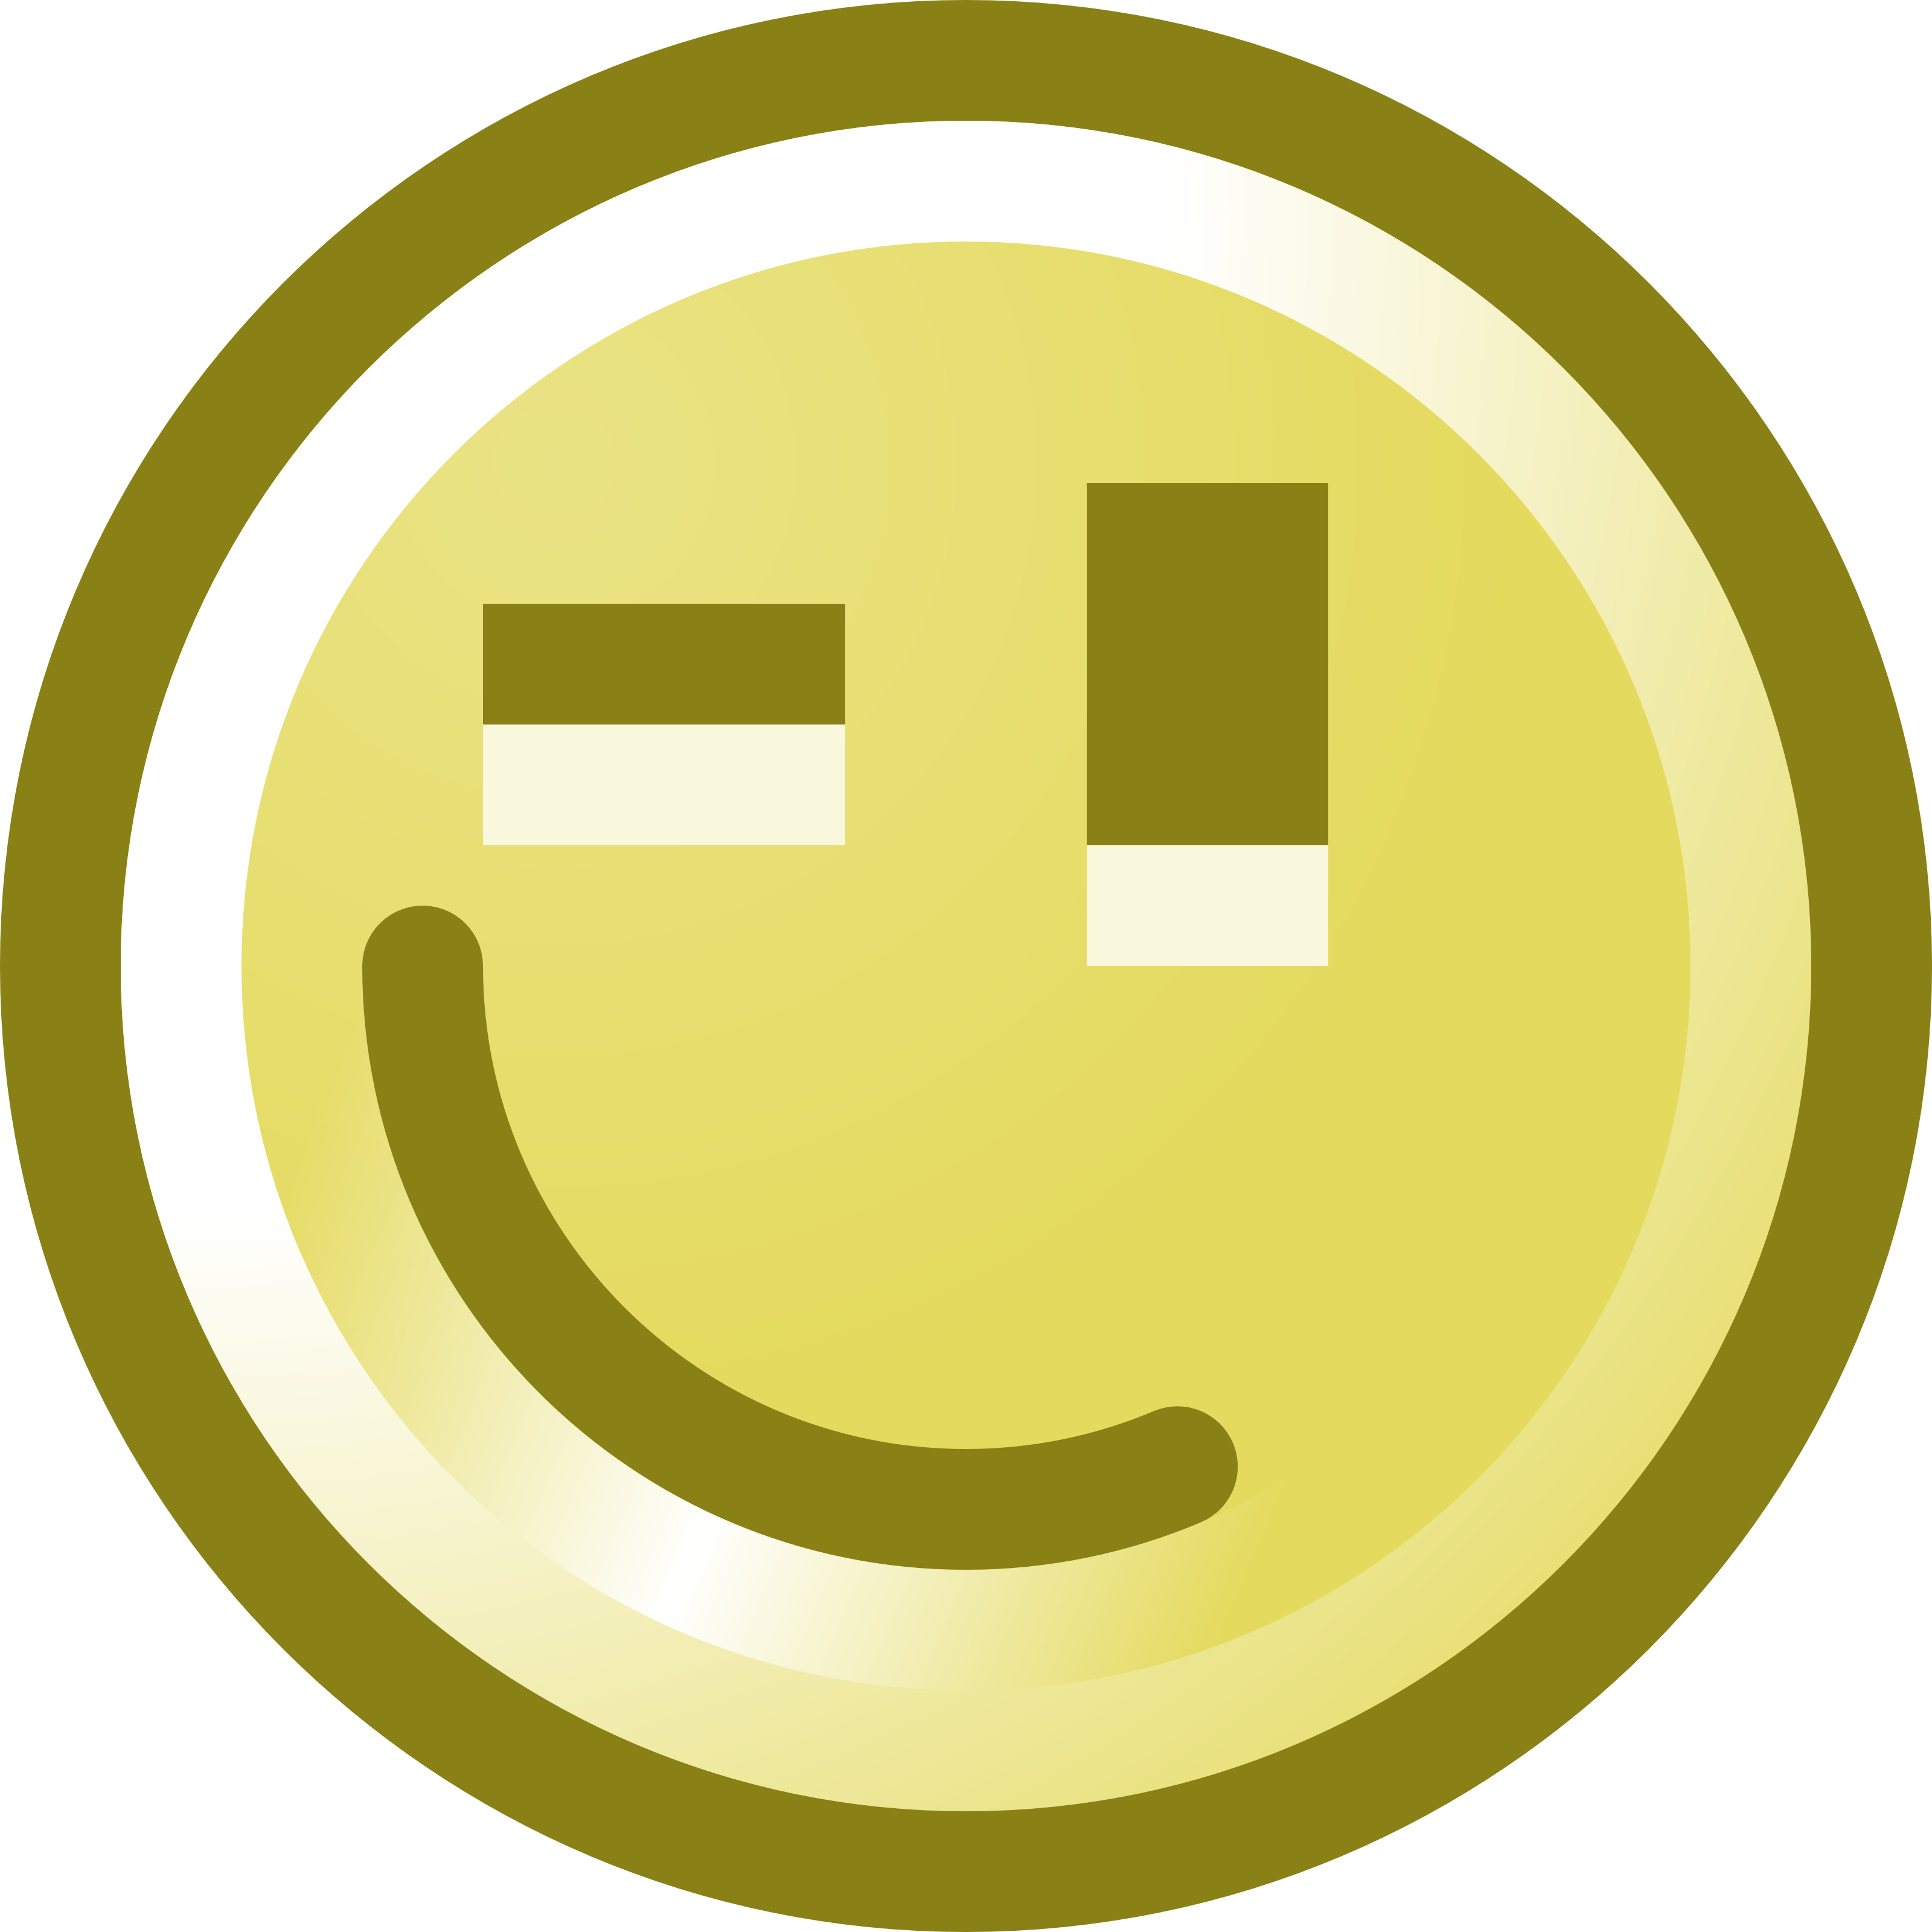 Sunny clipart face. Wink smiley image group